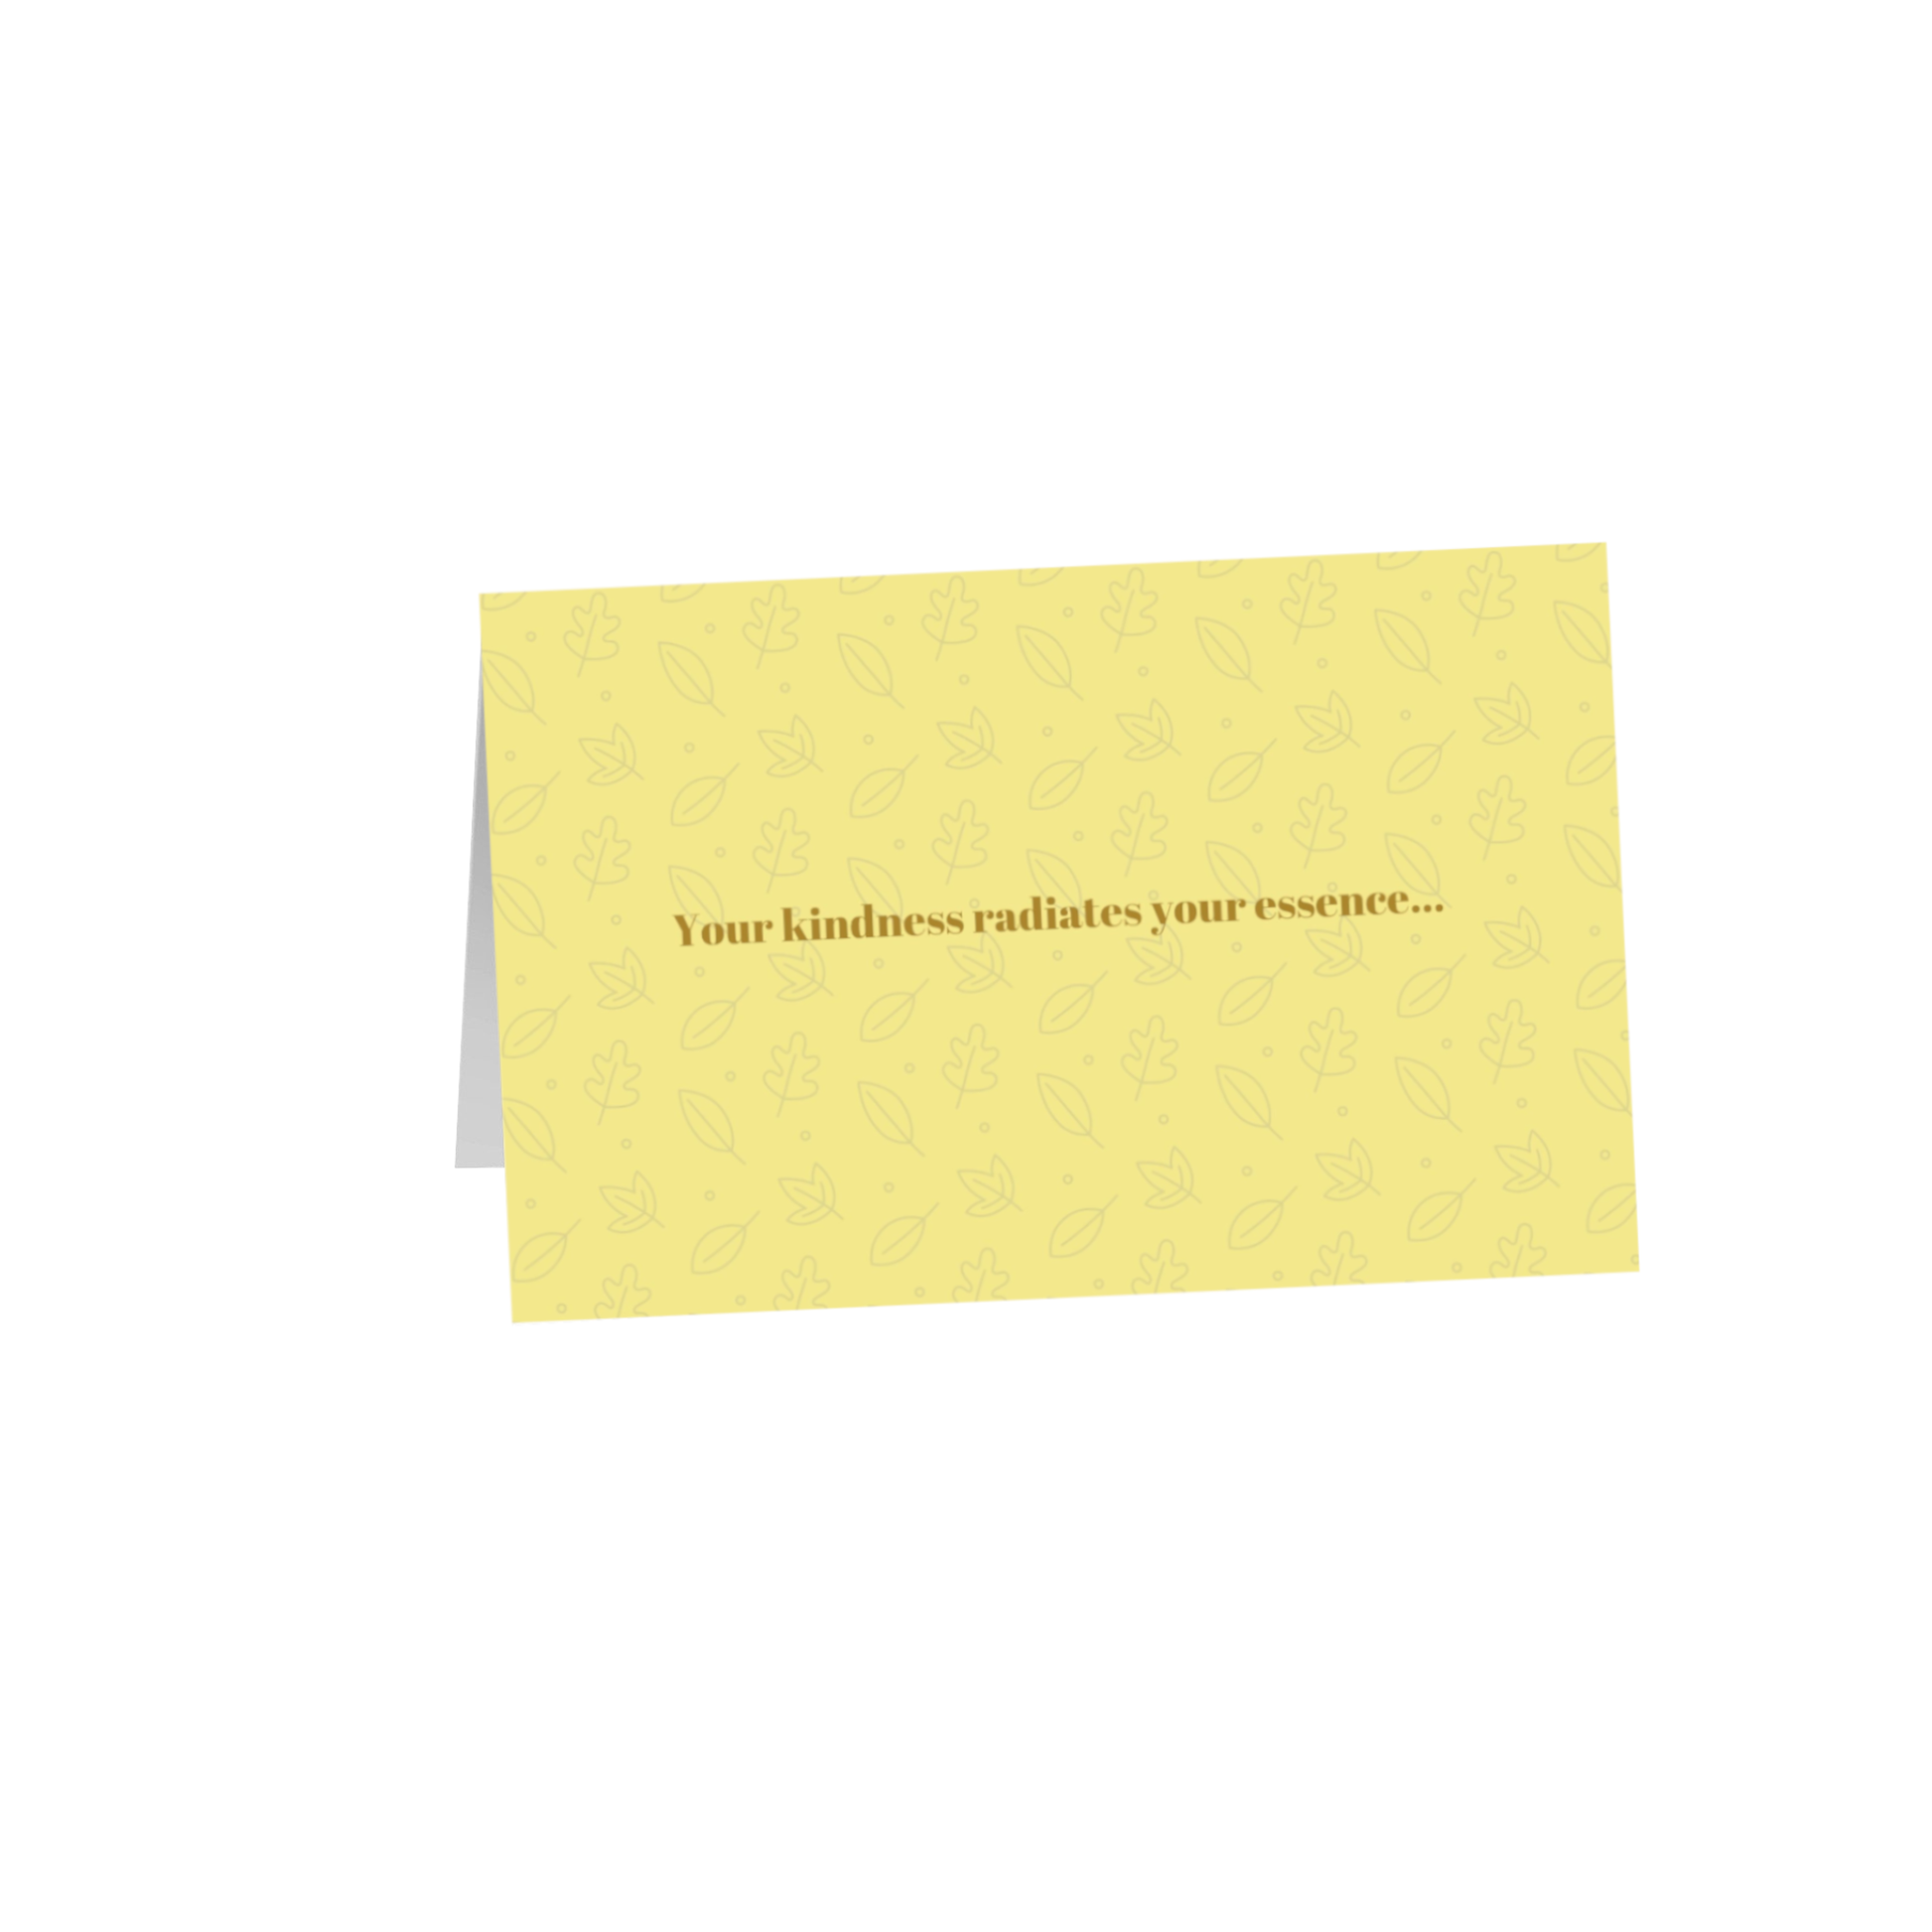 Your kindness radiates your essence... 8.5x5.5 Greeting Card